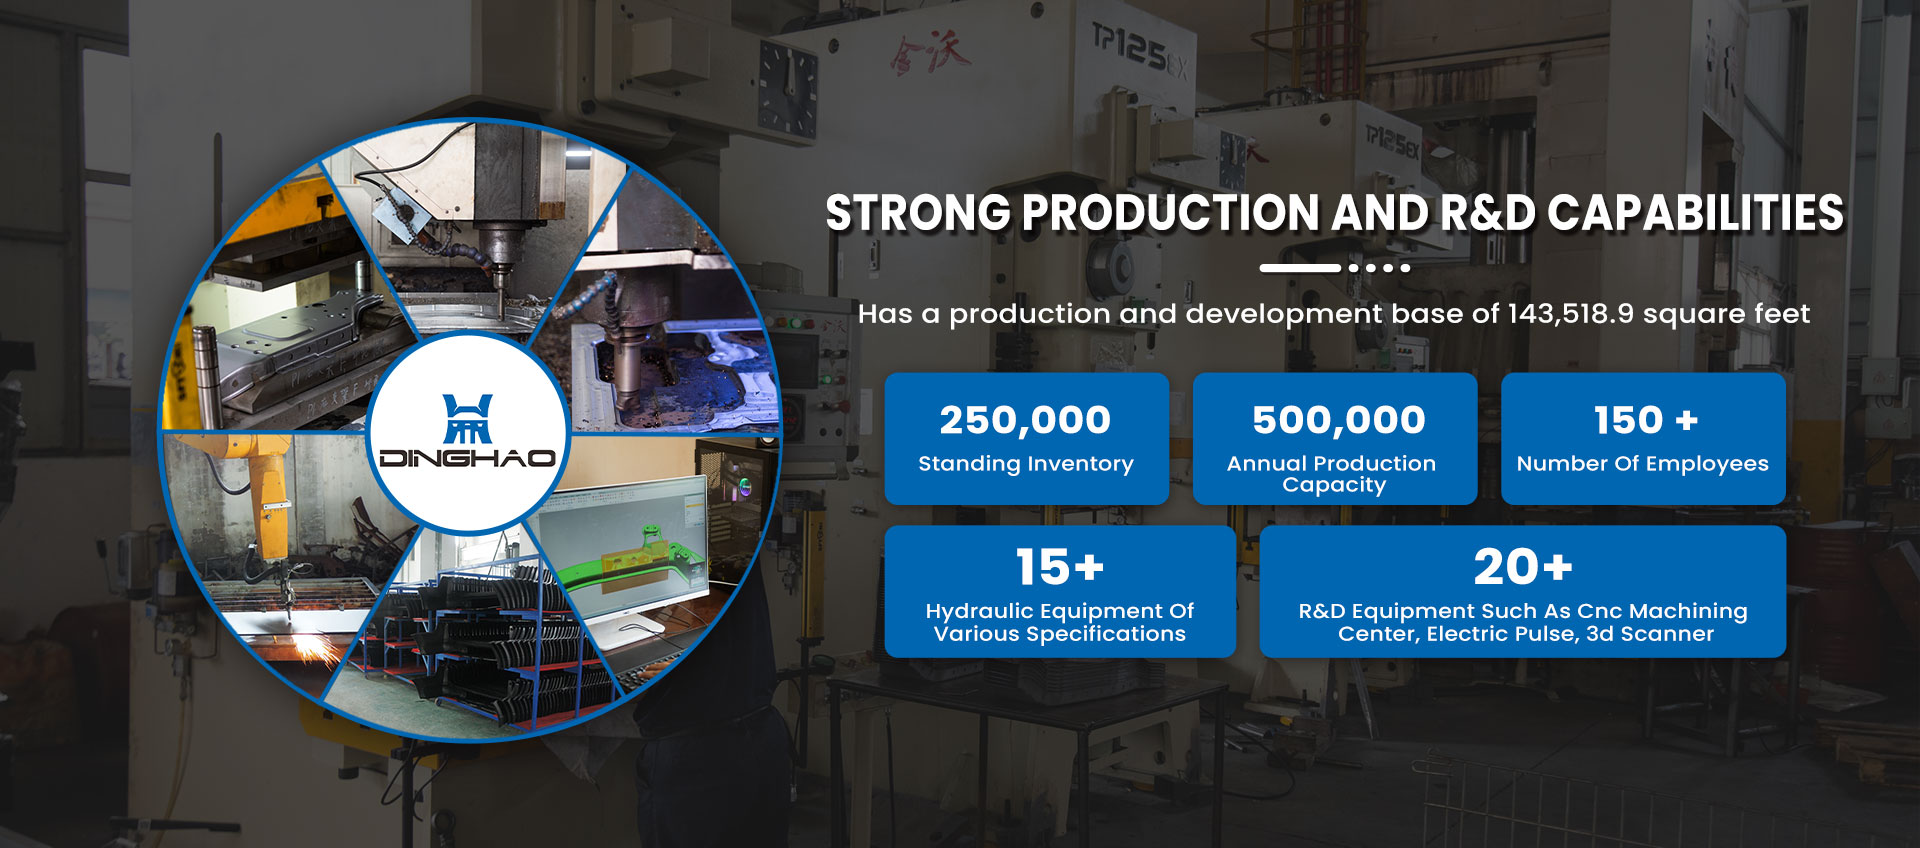 Strong production and R&D capabilities